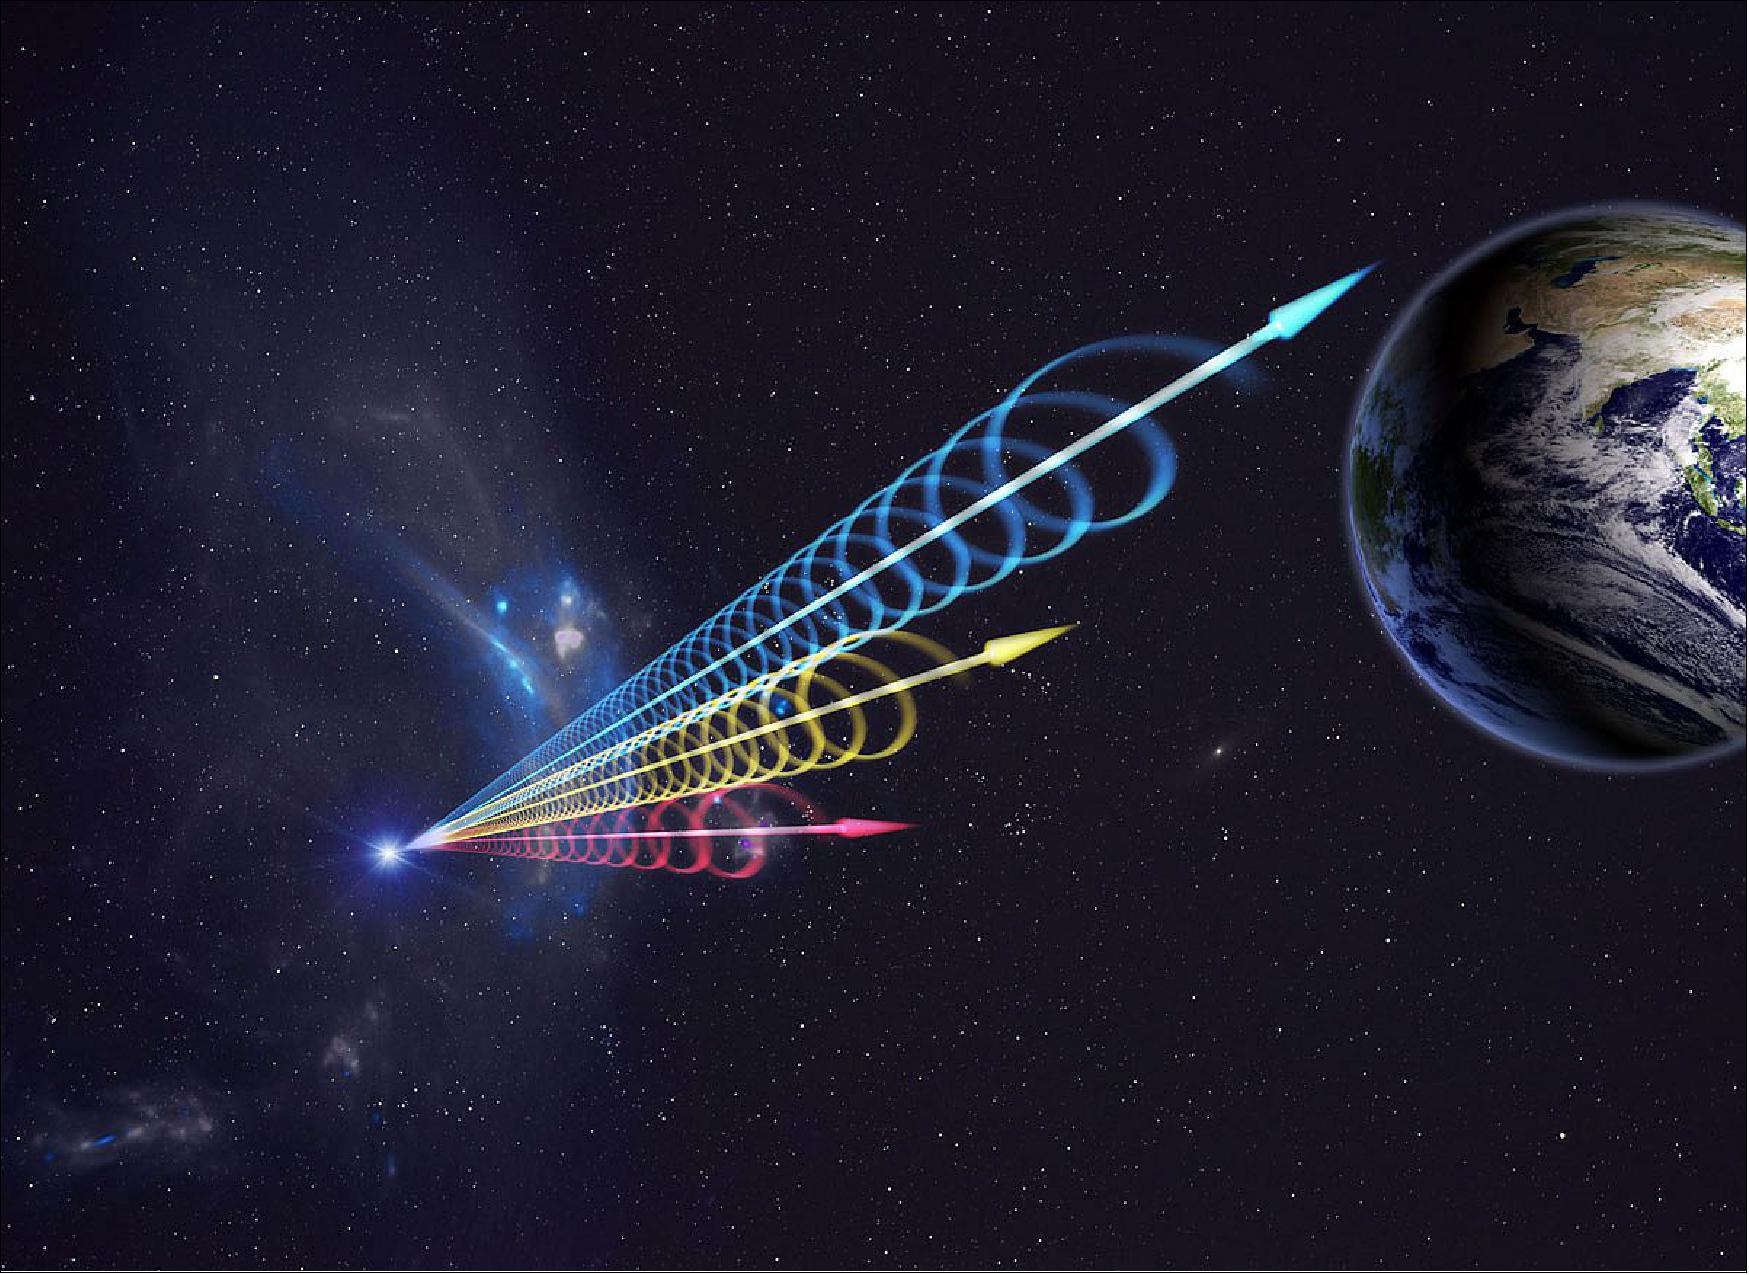 Figure 70: Artist impression of a Fast Radio Burst (FRB) reaching Earth. The colors represent the burst arriving at different radio wavelengths, with long wavelengths (red) arriving several seconds after short wavelengths (blue). This delay is called dispersion and occurs when radio waves travel through cosmic plasma (image credit: Jingchuan Yu, Beijing Planetarium)